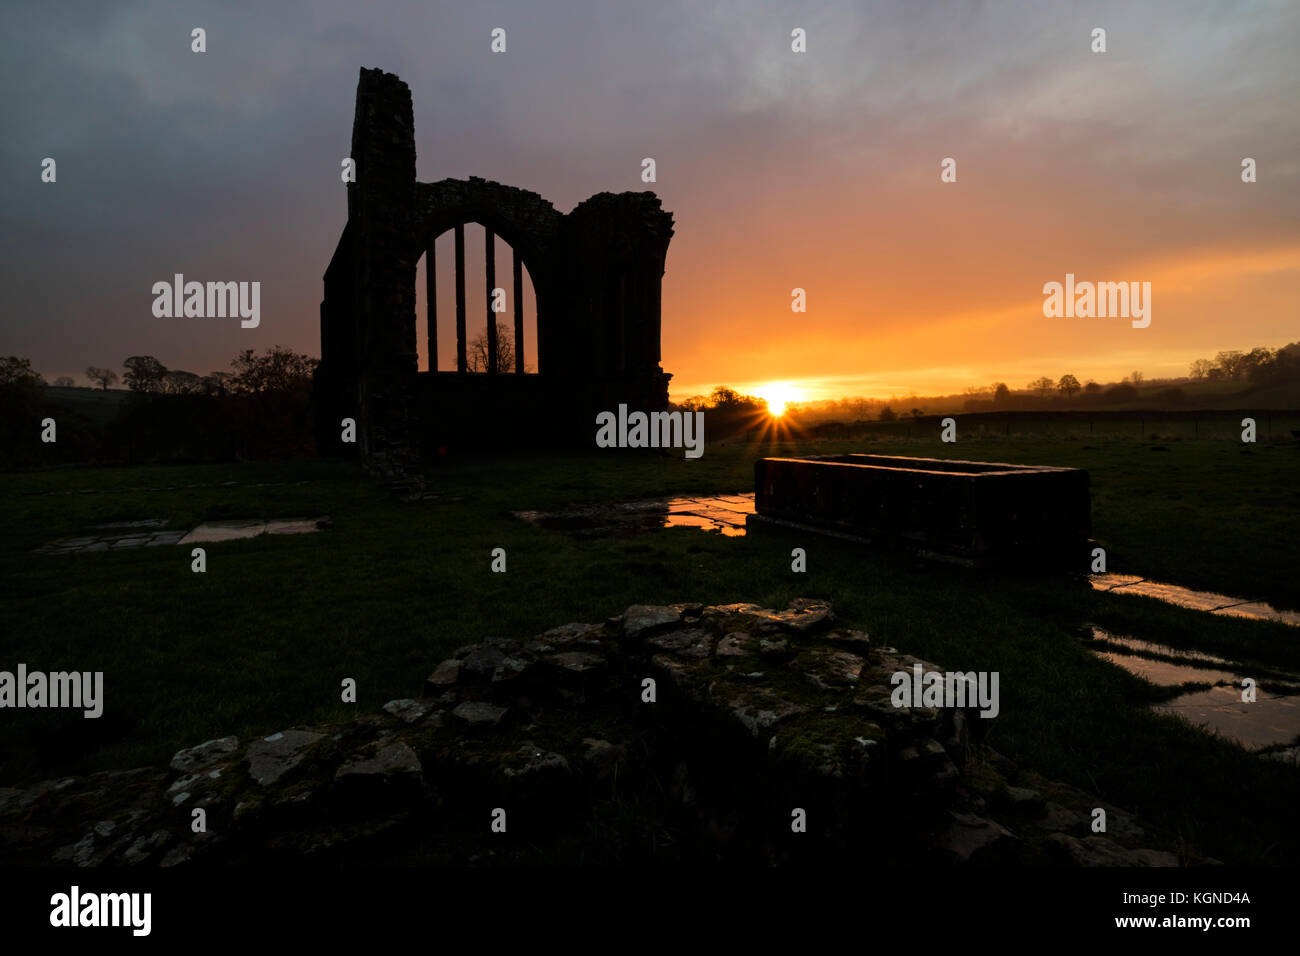 Egglestone Abbey, Barnard Castle, Teesdale, County Durham UK.  Thursday 9th November 2017. UK Weather.  Heavy showers to start the day as the first rays of the rising sun began to illuminate the ruins of Egglestone Abbey near Barnard Castle this morning.  Credit: David Forster/Alamy Live News Stock Photo